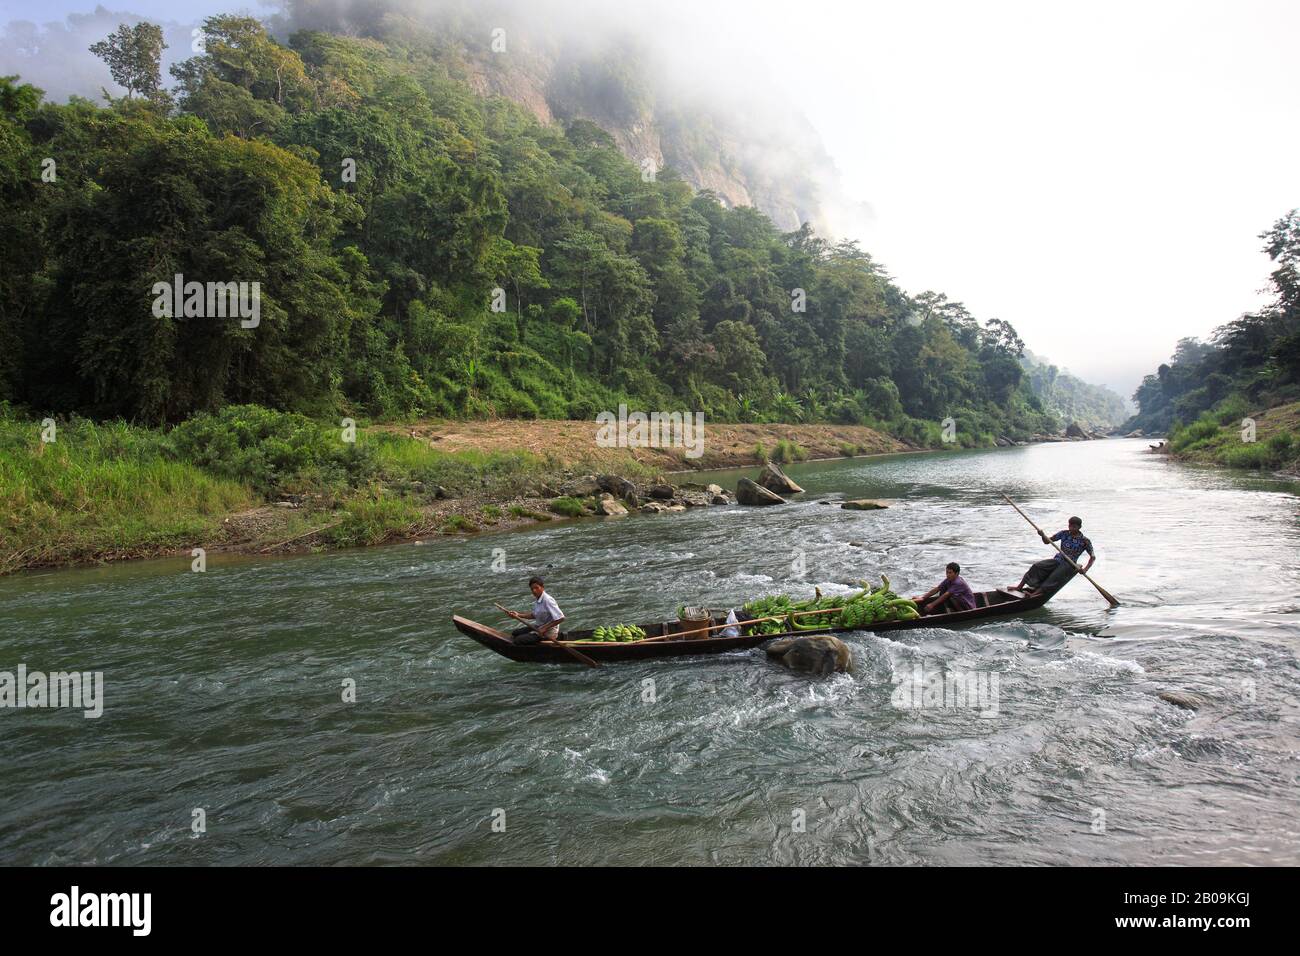 Ethnic men row a boat against the strong current of the Sangu river, in Tindu, Bandarban, Bangladesh. November 2010. Stock Photo